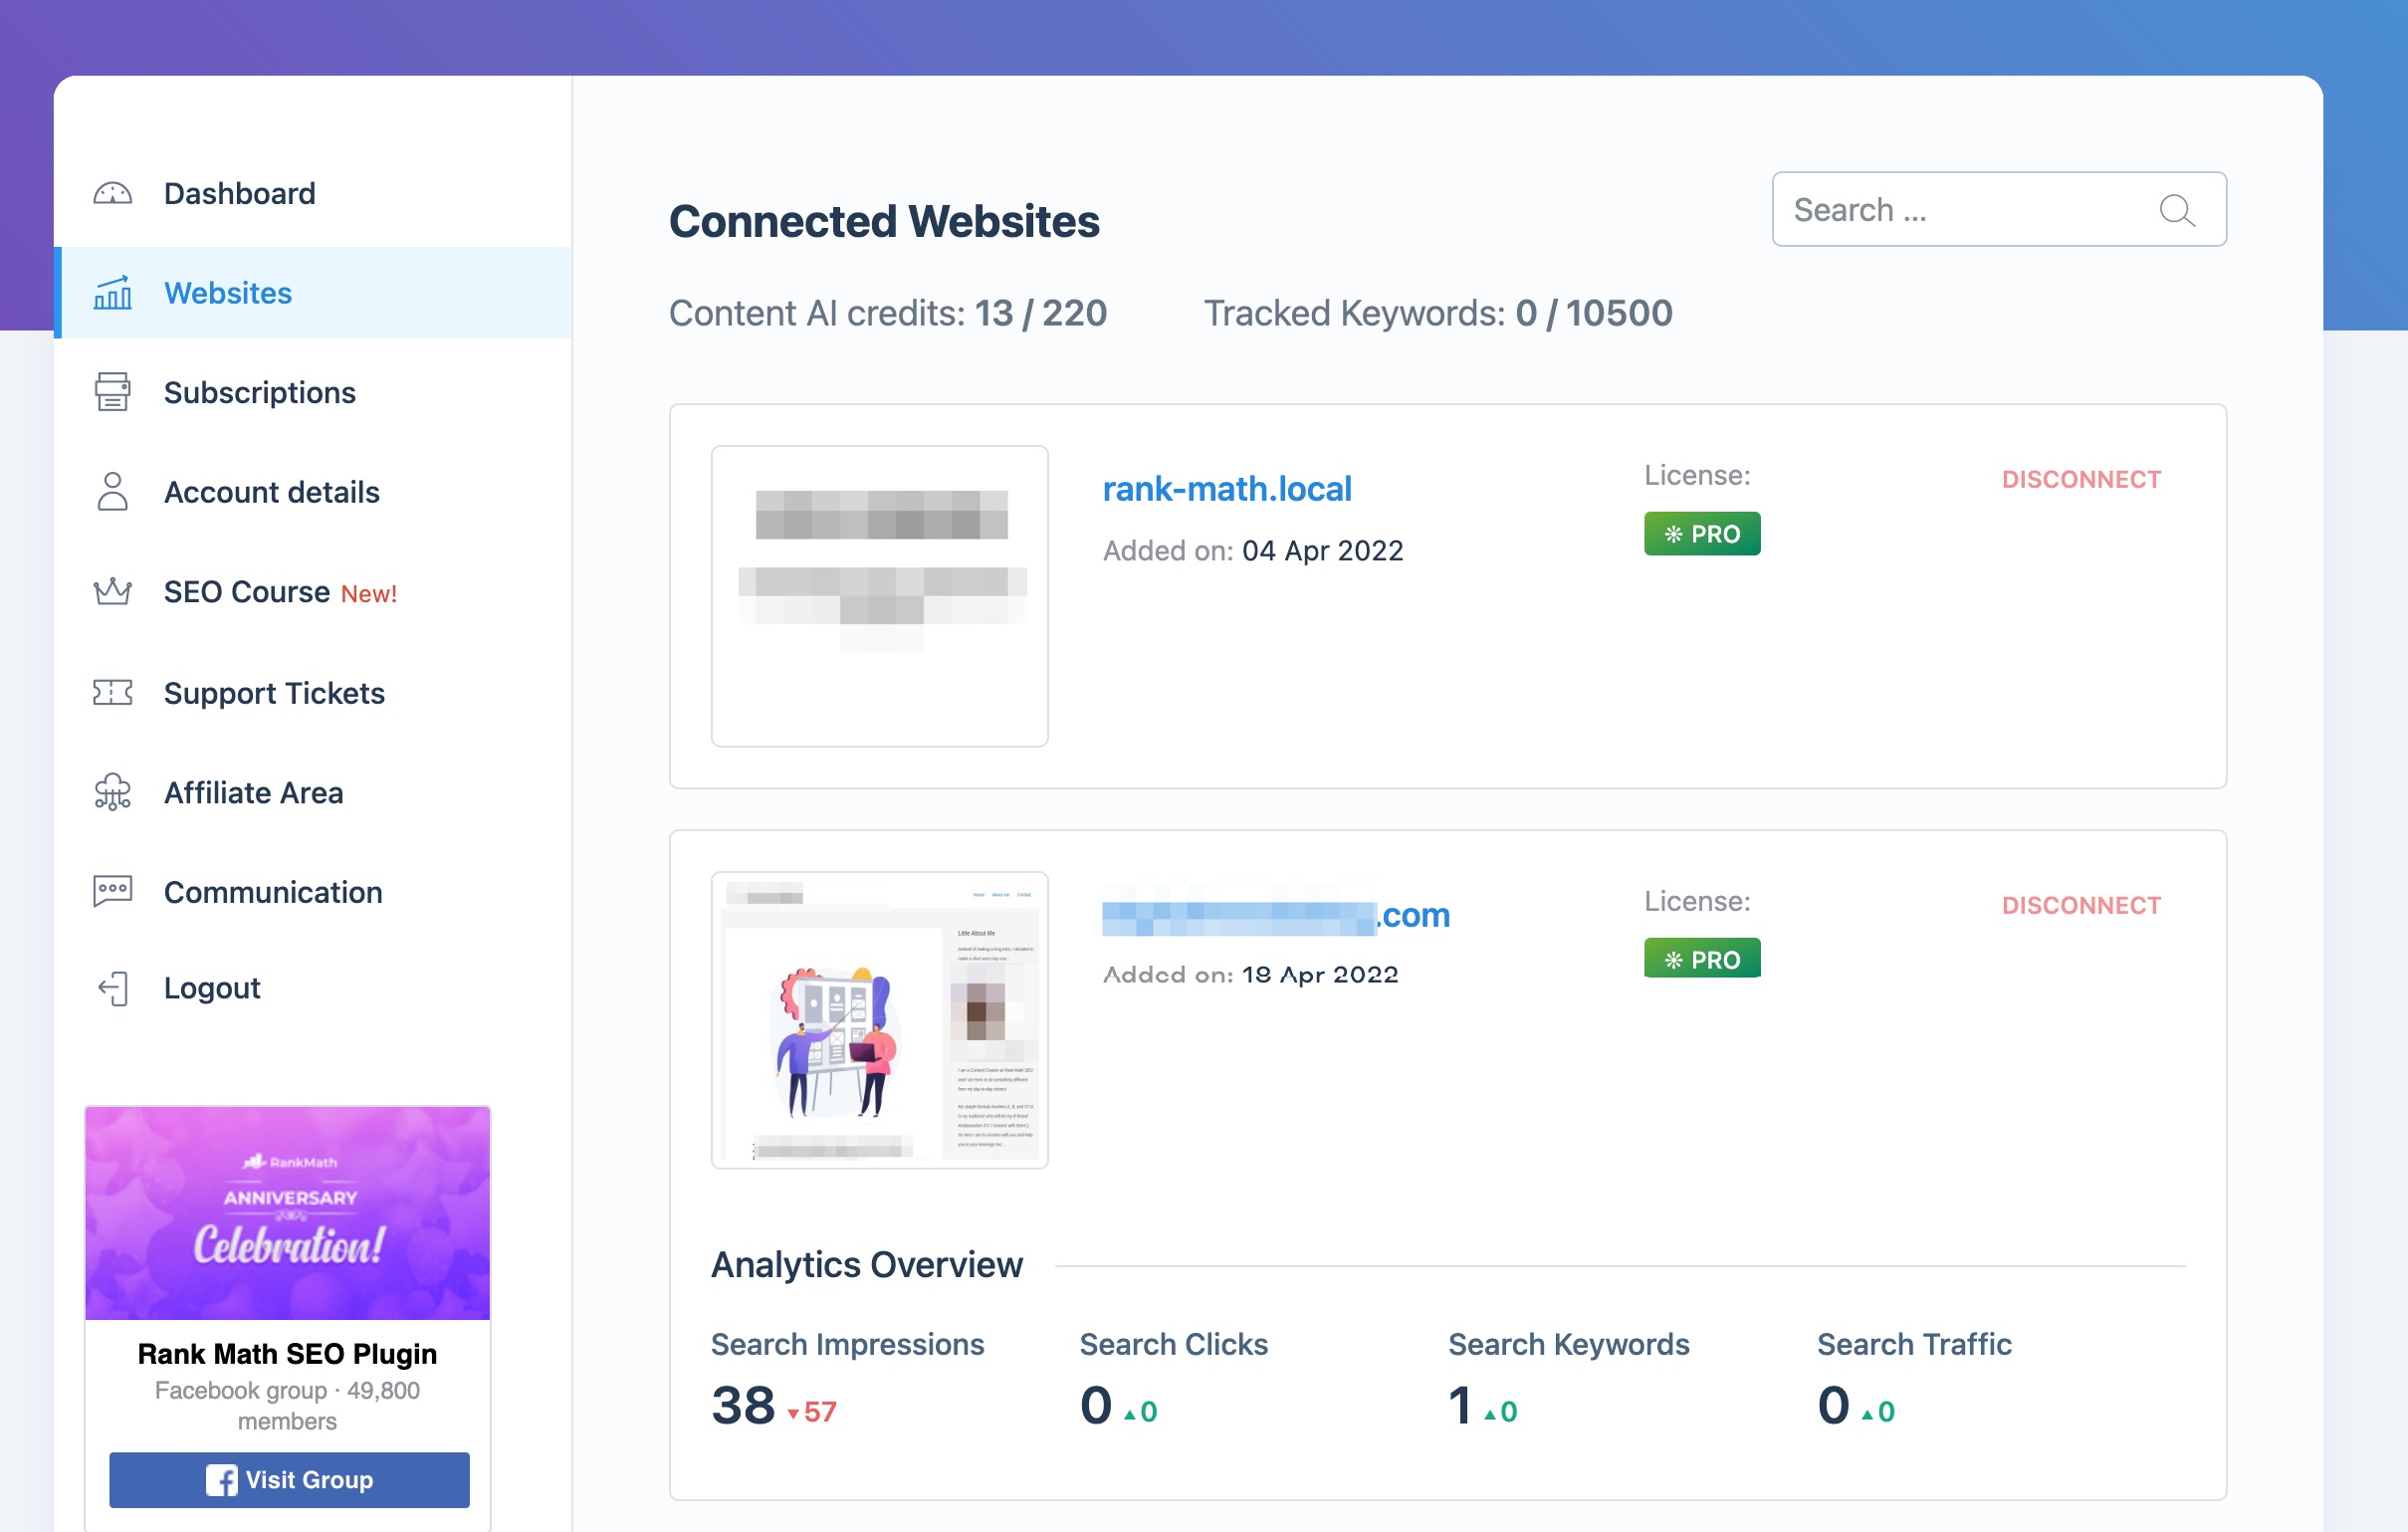 Connected websites in Rank Math Client Management dashboard